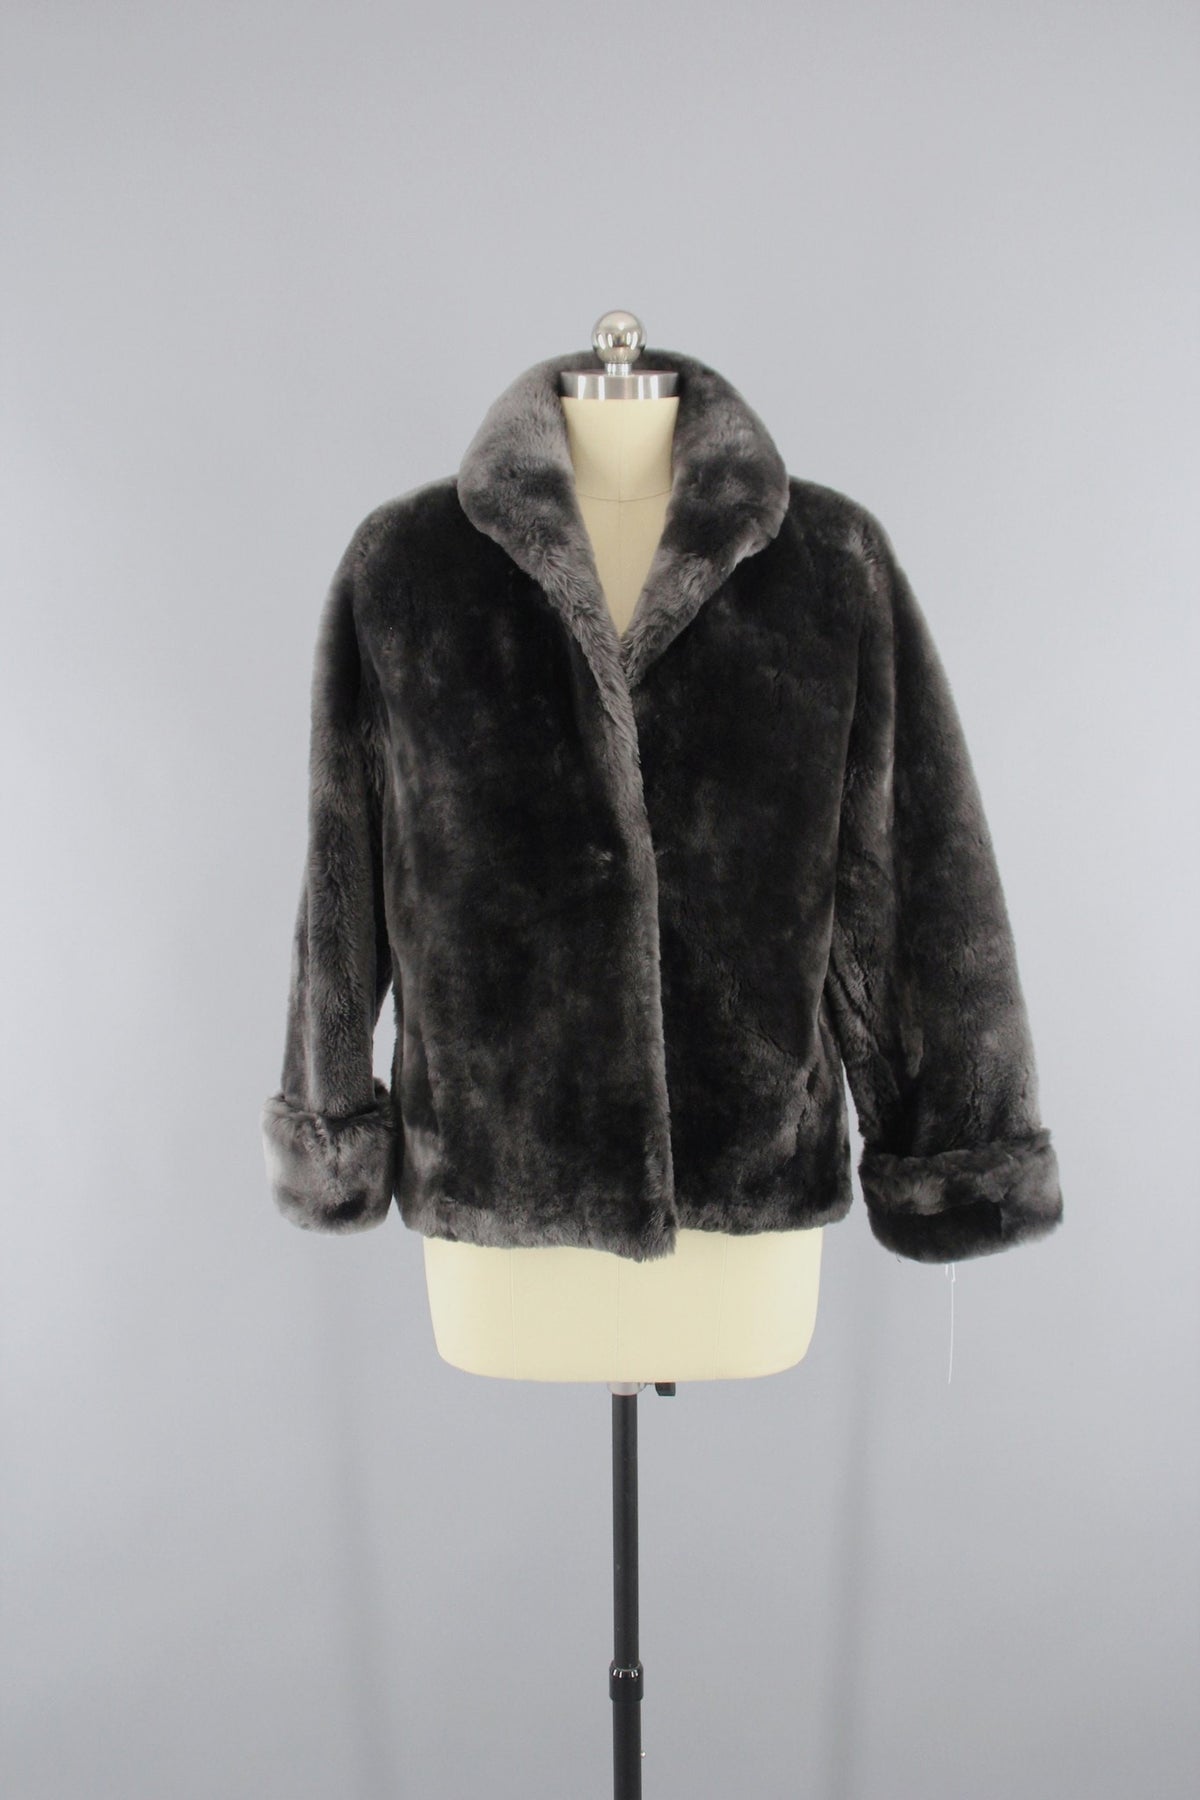 1950s Mouton Fur Coat in SILVER Brown